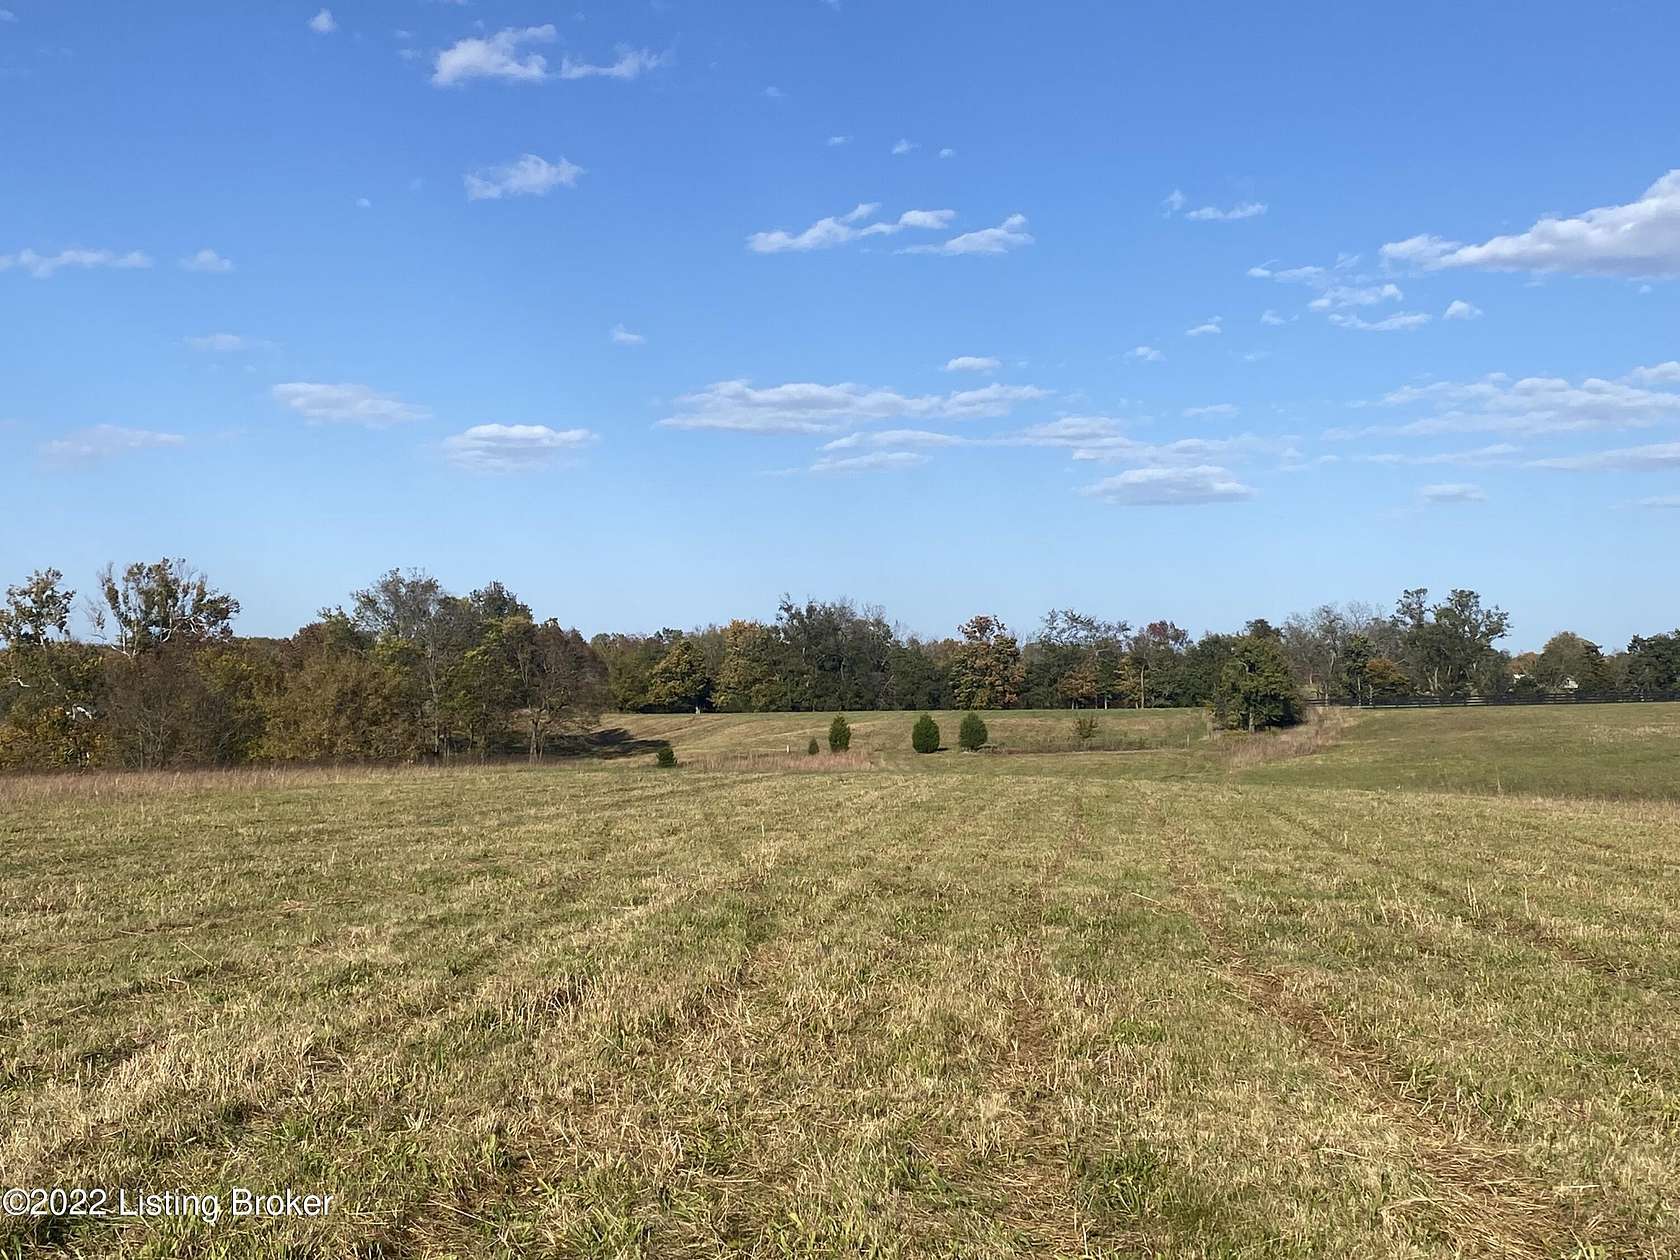 27.2 Acres of Land for Sale in Shelbyville, Kentucky